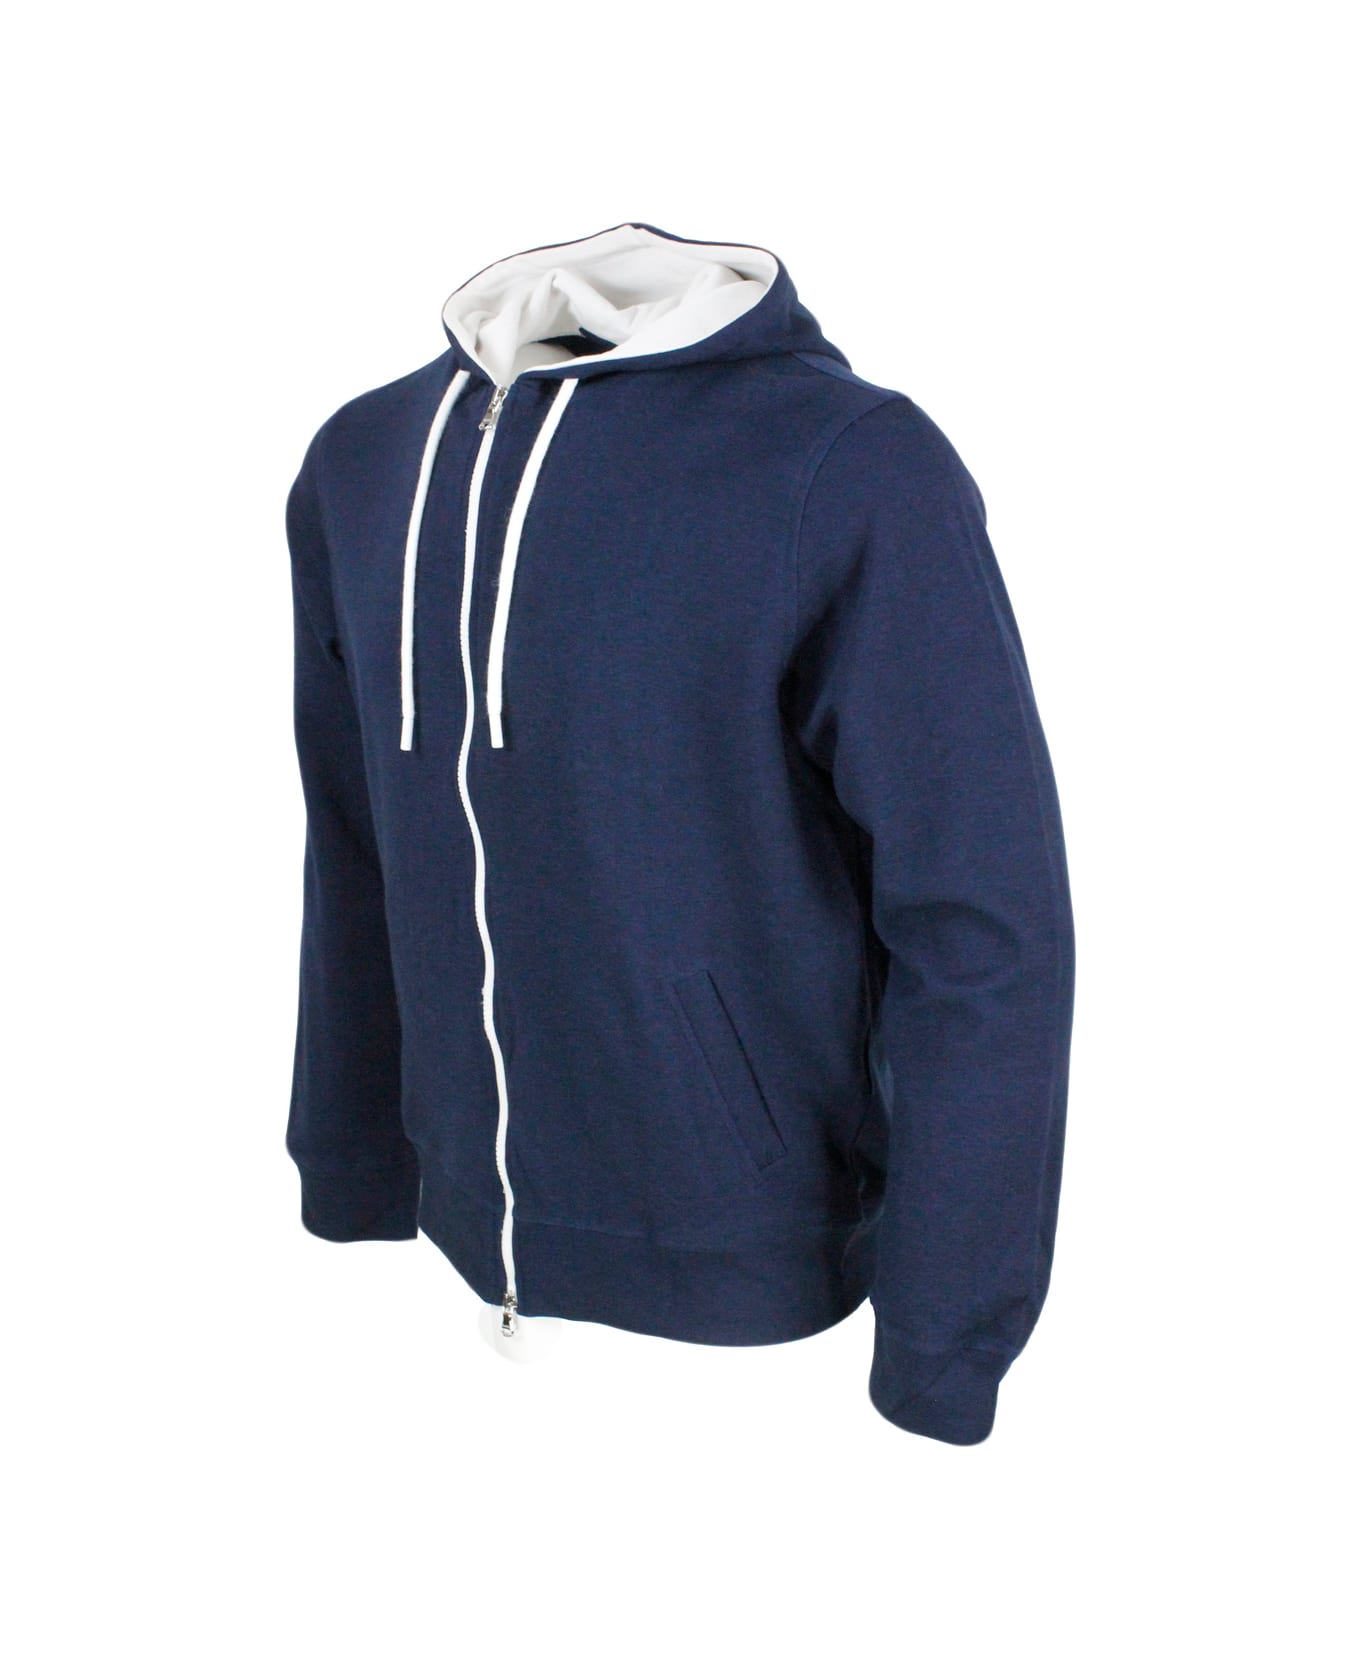 Barba Napoli Lightweight Stretch Cotton Sweatshirt With Hood With Contrasting Color Interior And Zip Closure - Blu